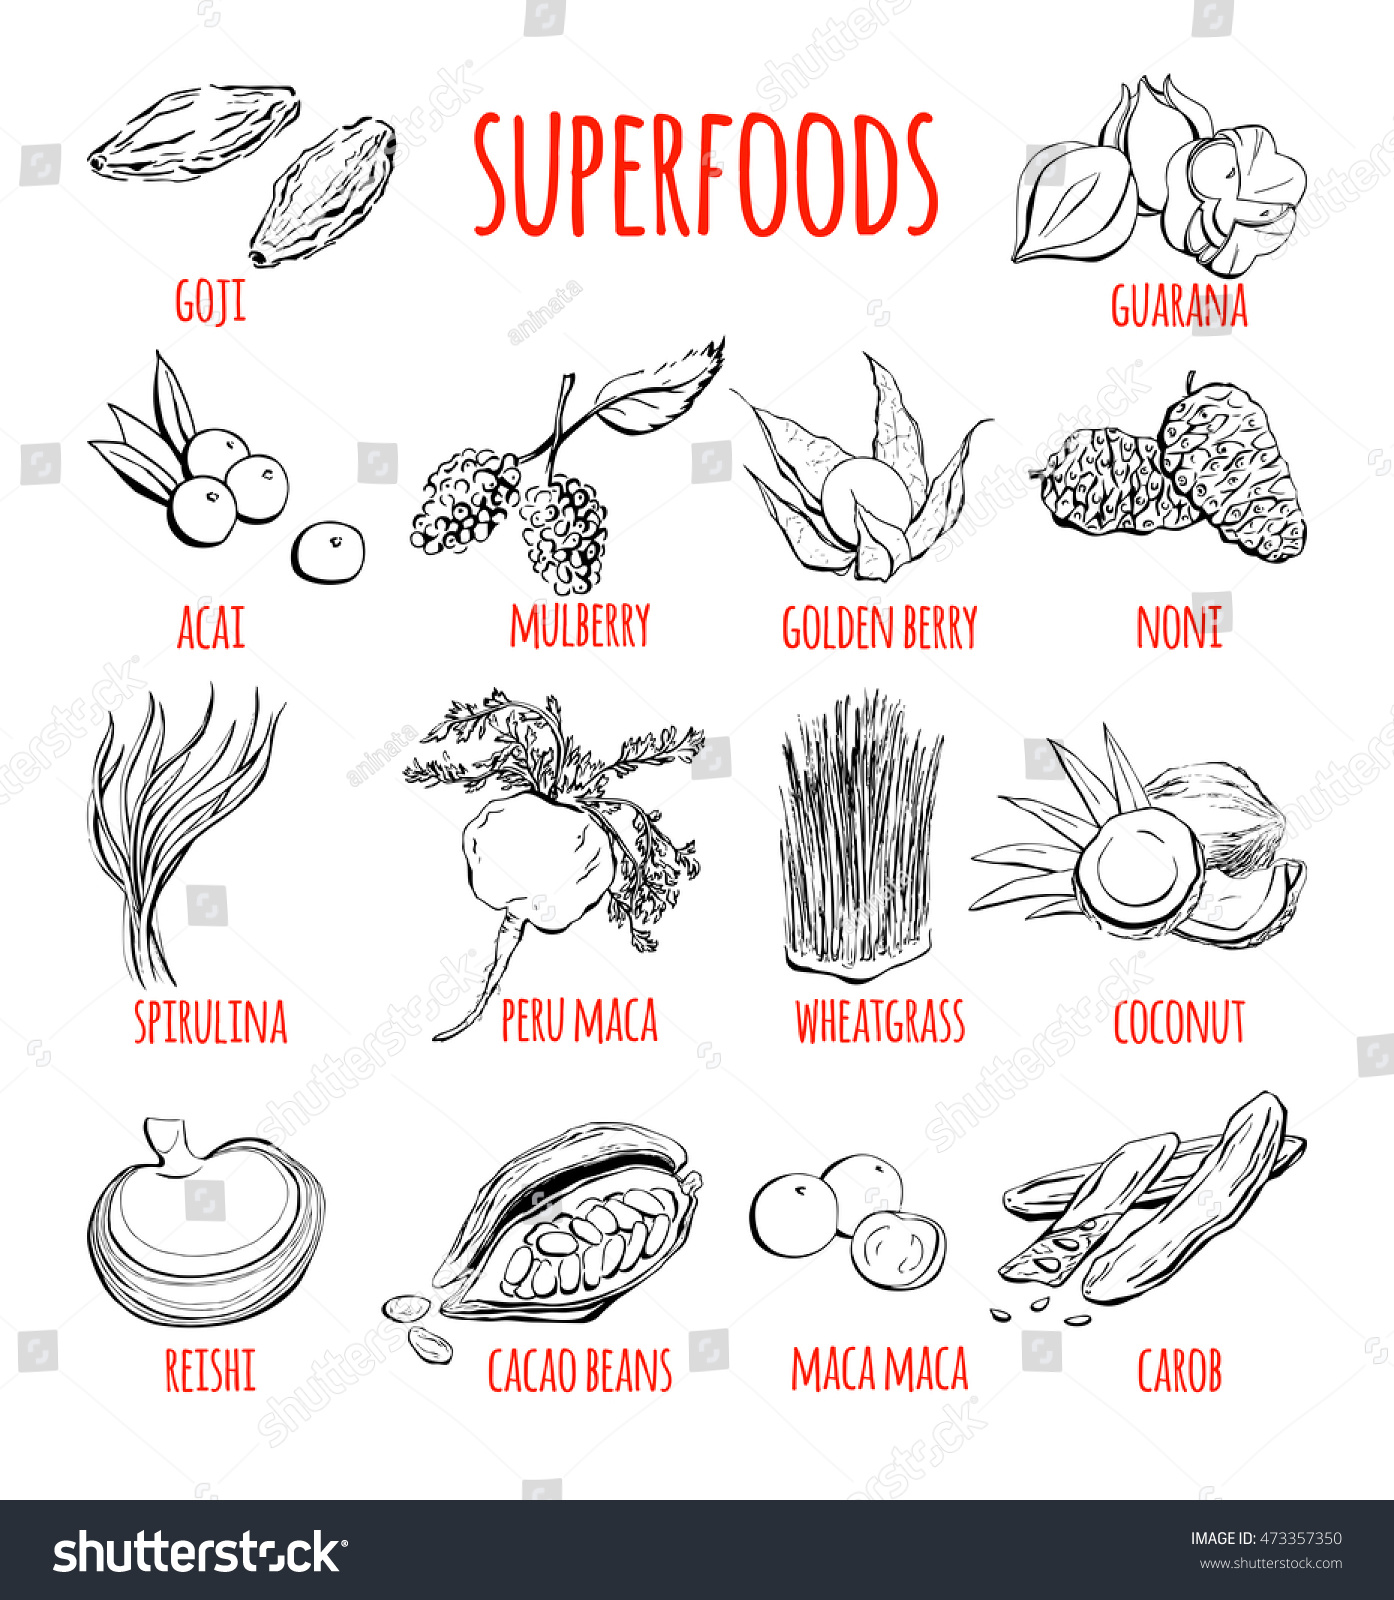 Big set of vector doodle illustrations of the most popular super foods. Collection of hand drawn fruits, plants and berries with black outline isolated on white background. #473357350